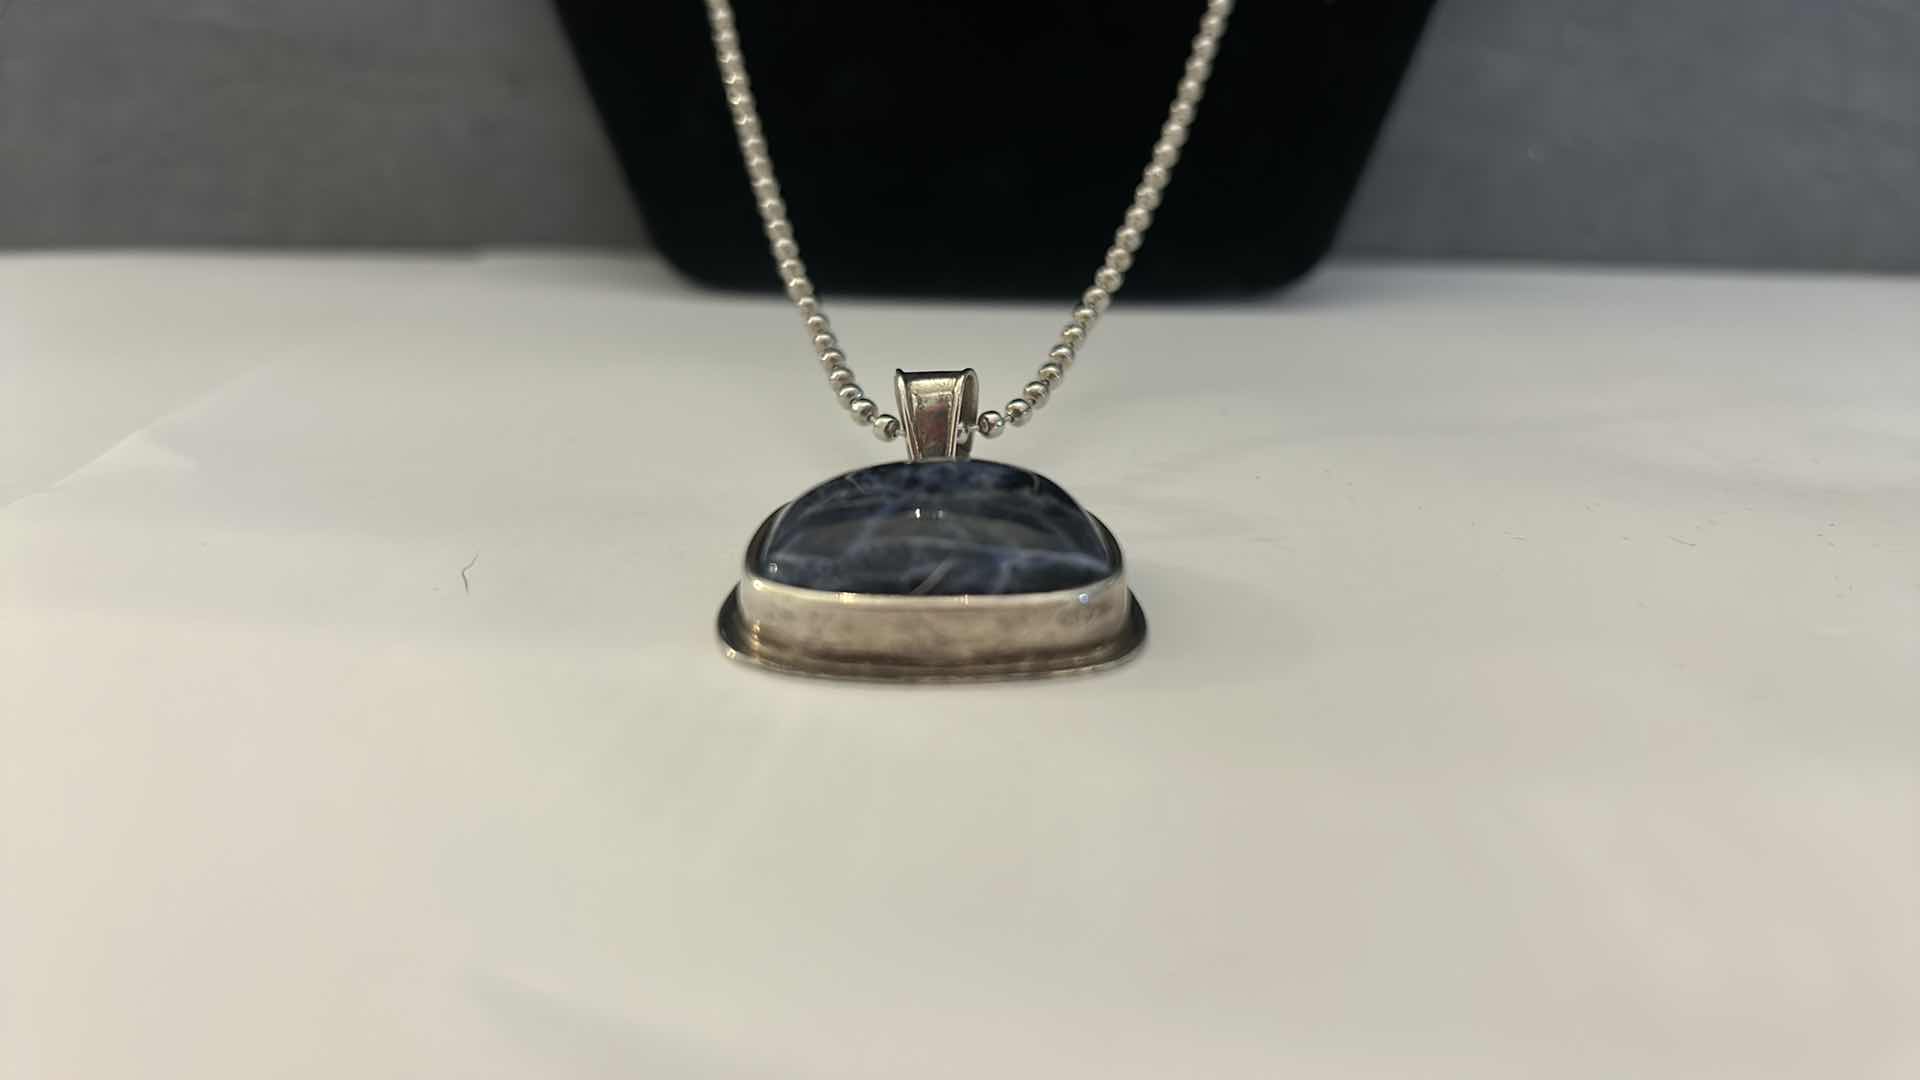 Photo 5 of FINE JEWELRY- .925 STERLING SILVER SILPADA PENDANT (1.25”) WITH DEEP BLUE SODALITE STONE AND CHAIN